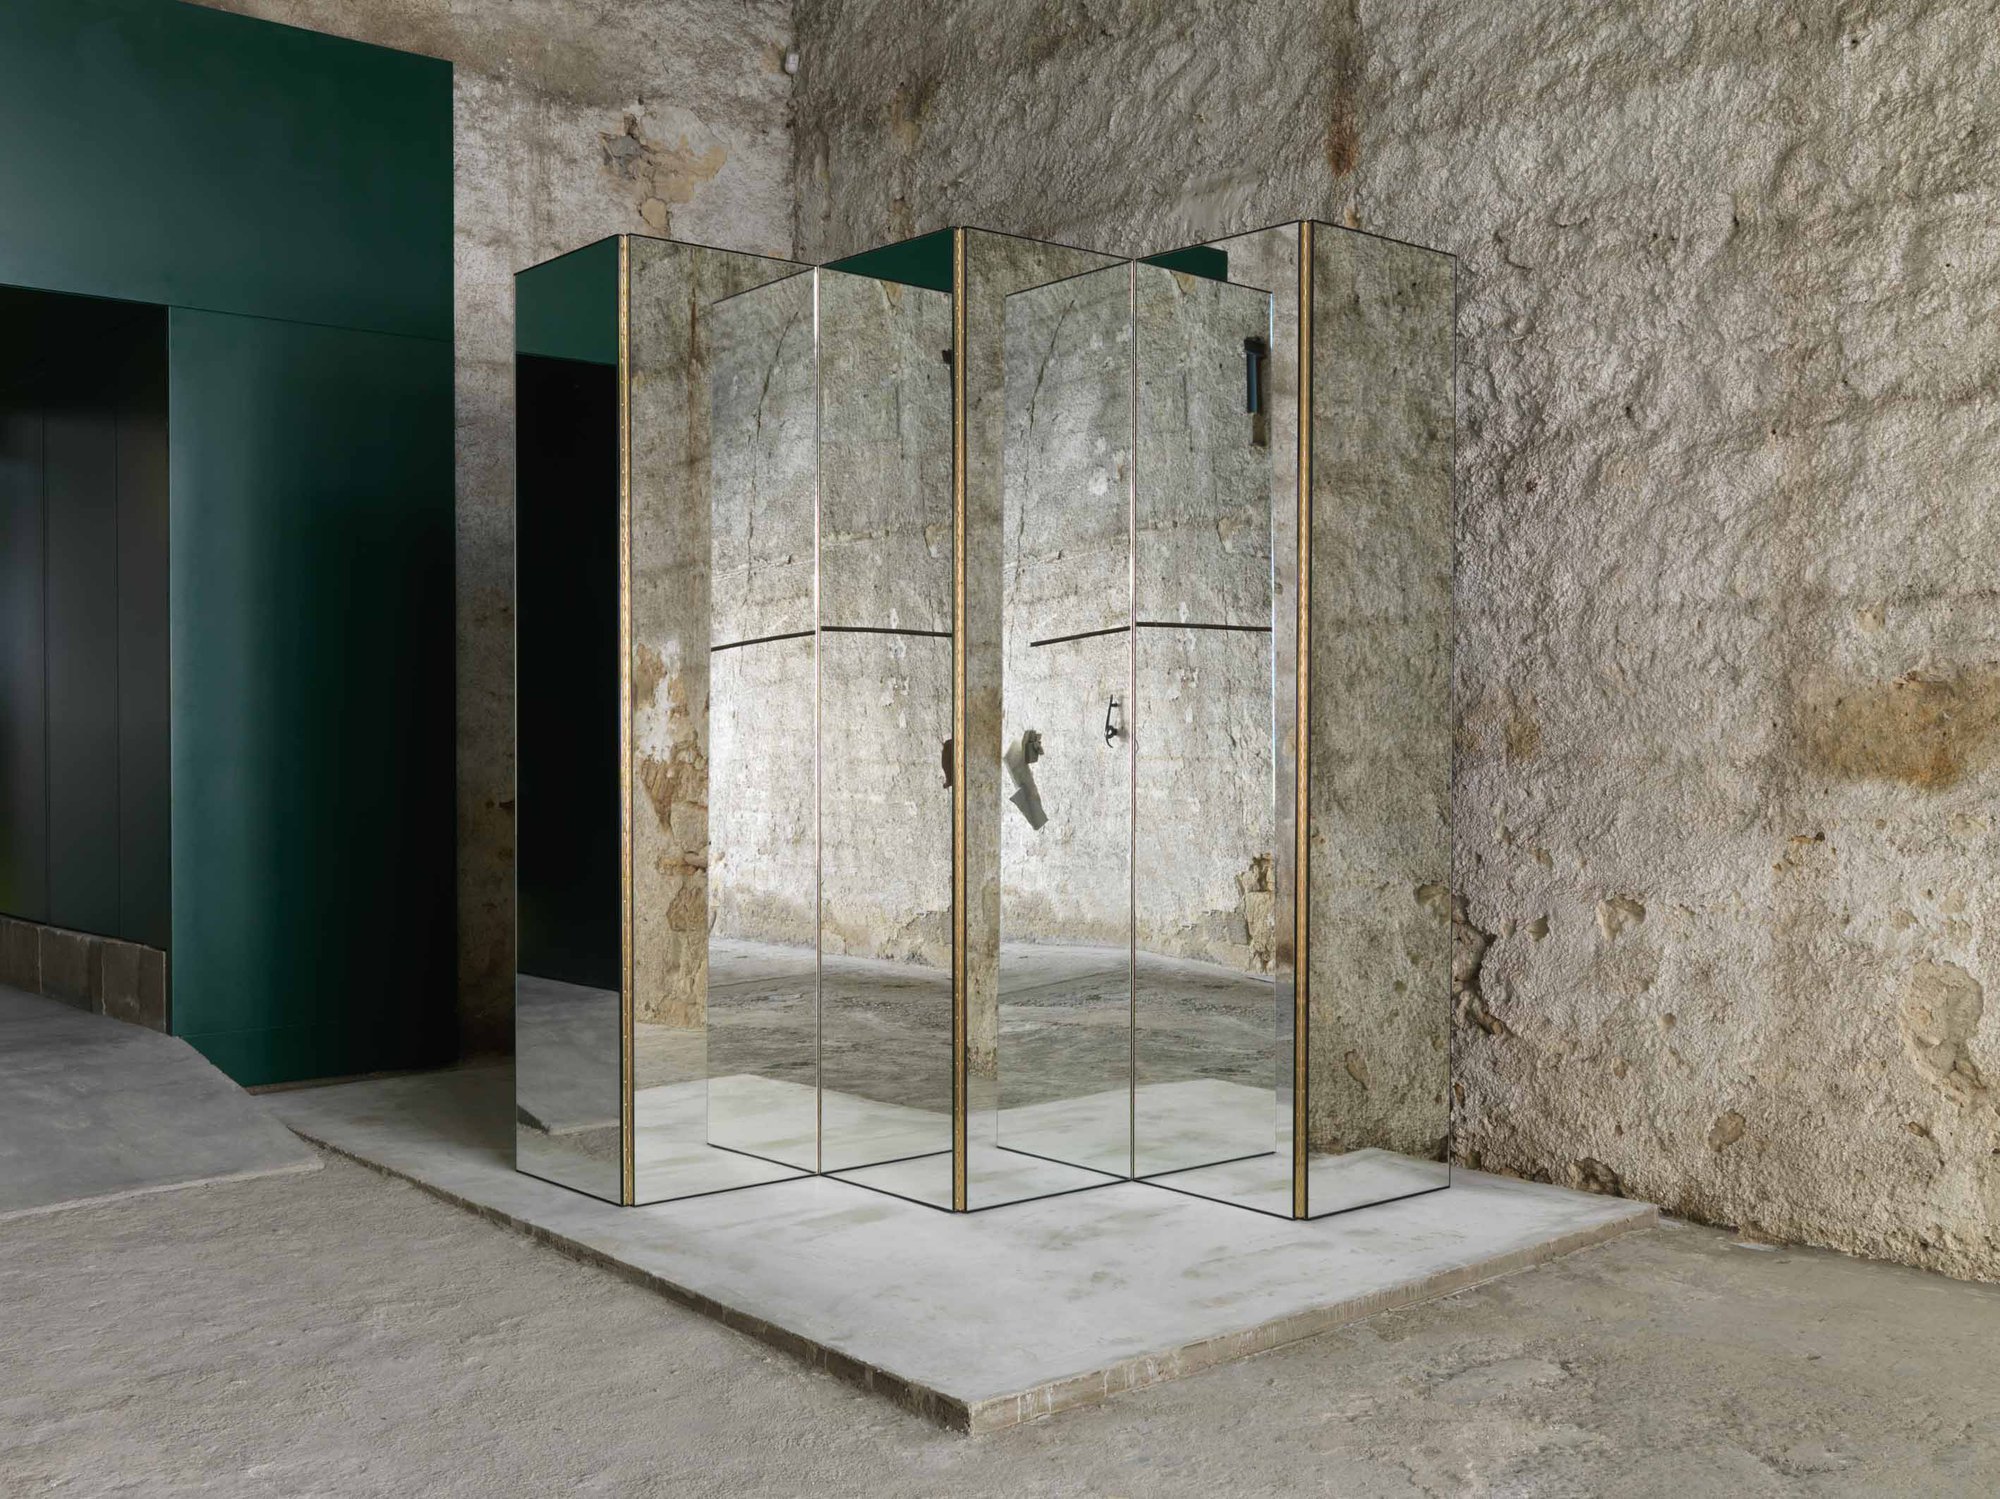 Haris Epaminonda, Untitled #07 g/j, black glossy lacquered paravent with mirrors: 260 x 360 cm (102 3/8 x 141 3/4 in), trompe l’oeil painting on column: 24.5 x 24.5 x 132 cm (9 5/8 x 9 5/8 x 52 in), chinese black vase: 18.4 x 11 x 11 cm (7 1/4 x 4 3/8 x 4 3/8 in) and ceramic horse: 43 x 17 x 43 cm (16 7/8 x 6 3/4 x 16 7/8 in), dimensions variable, 2019